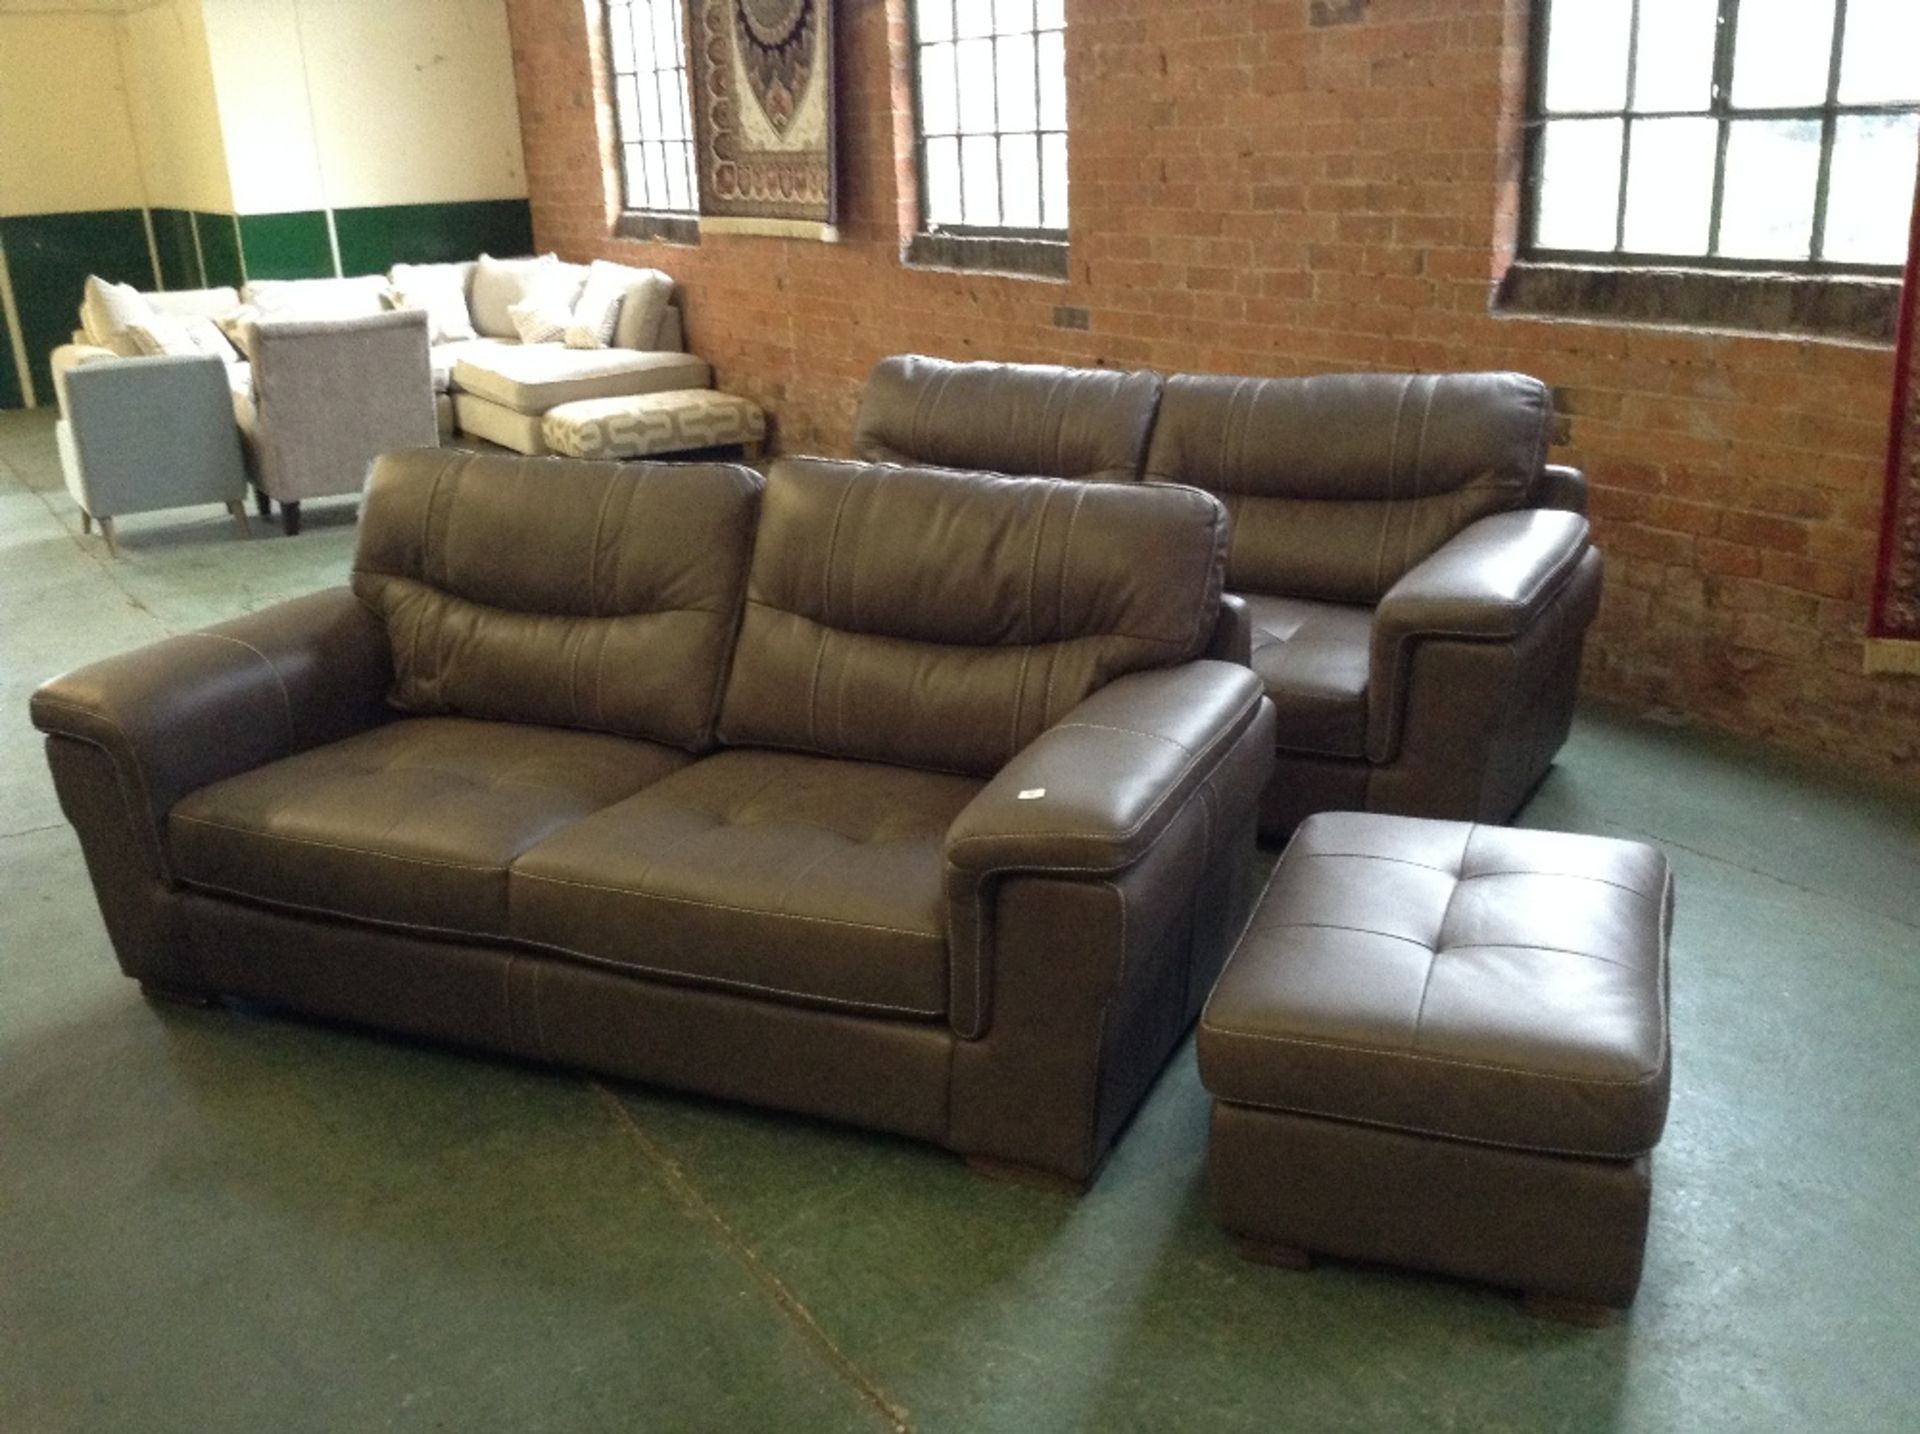 2 x GREY LEATHER WITH WHITE STITCH 3 SEATER SOFAS